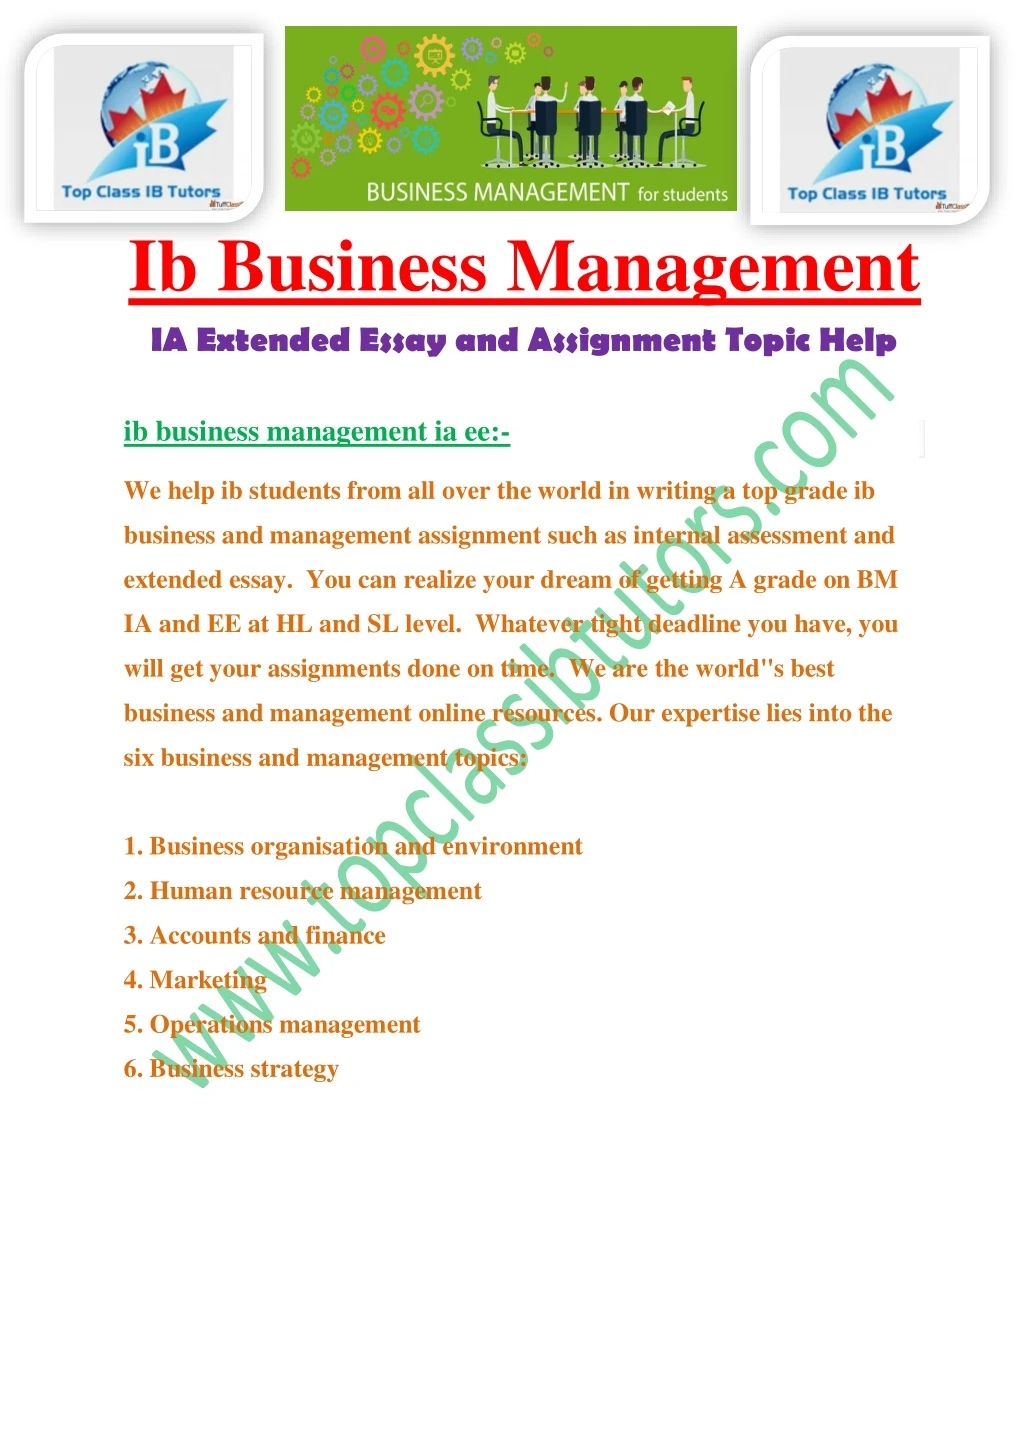 ib business management ia extended essay